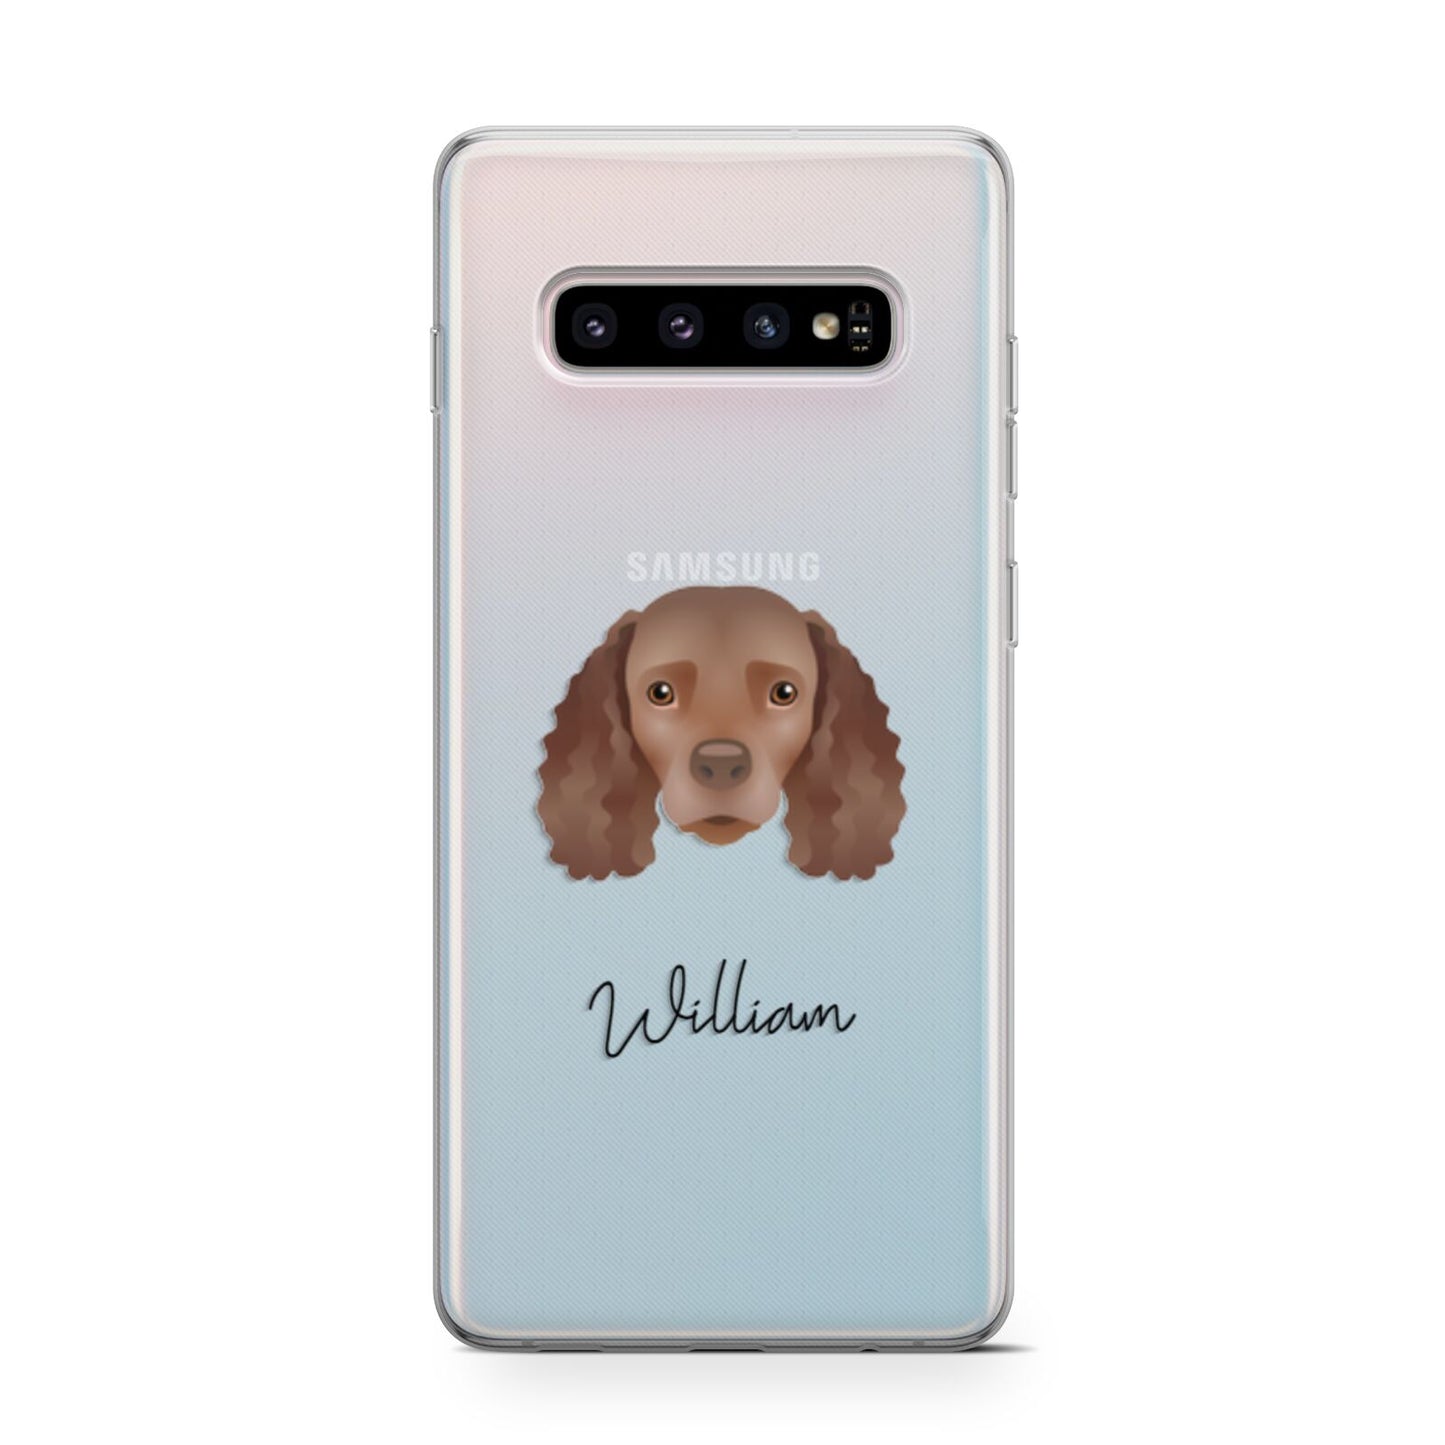 American Water Spaniel Personalised Samsung Galaxy S10 Case